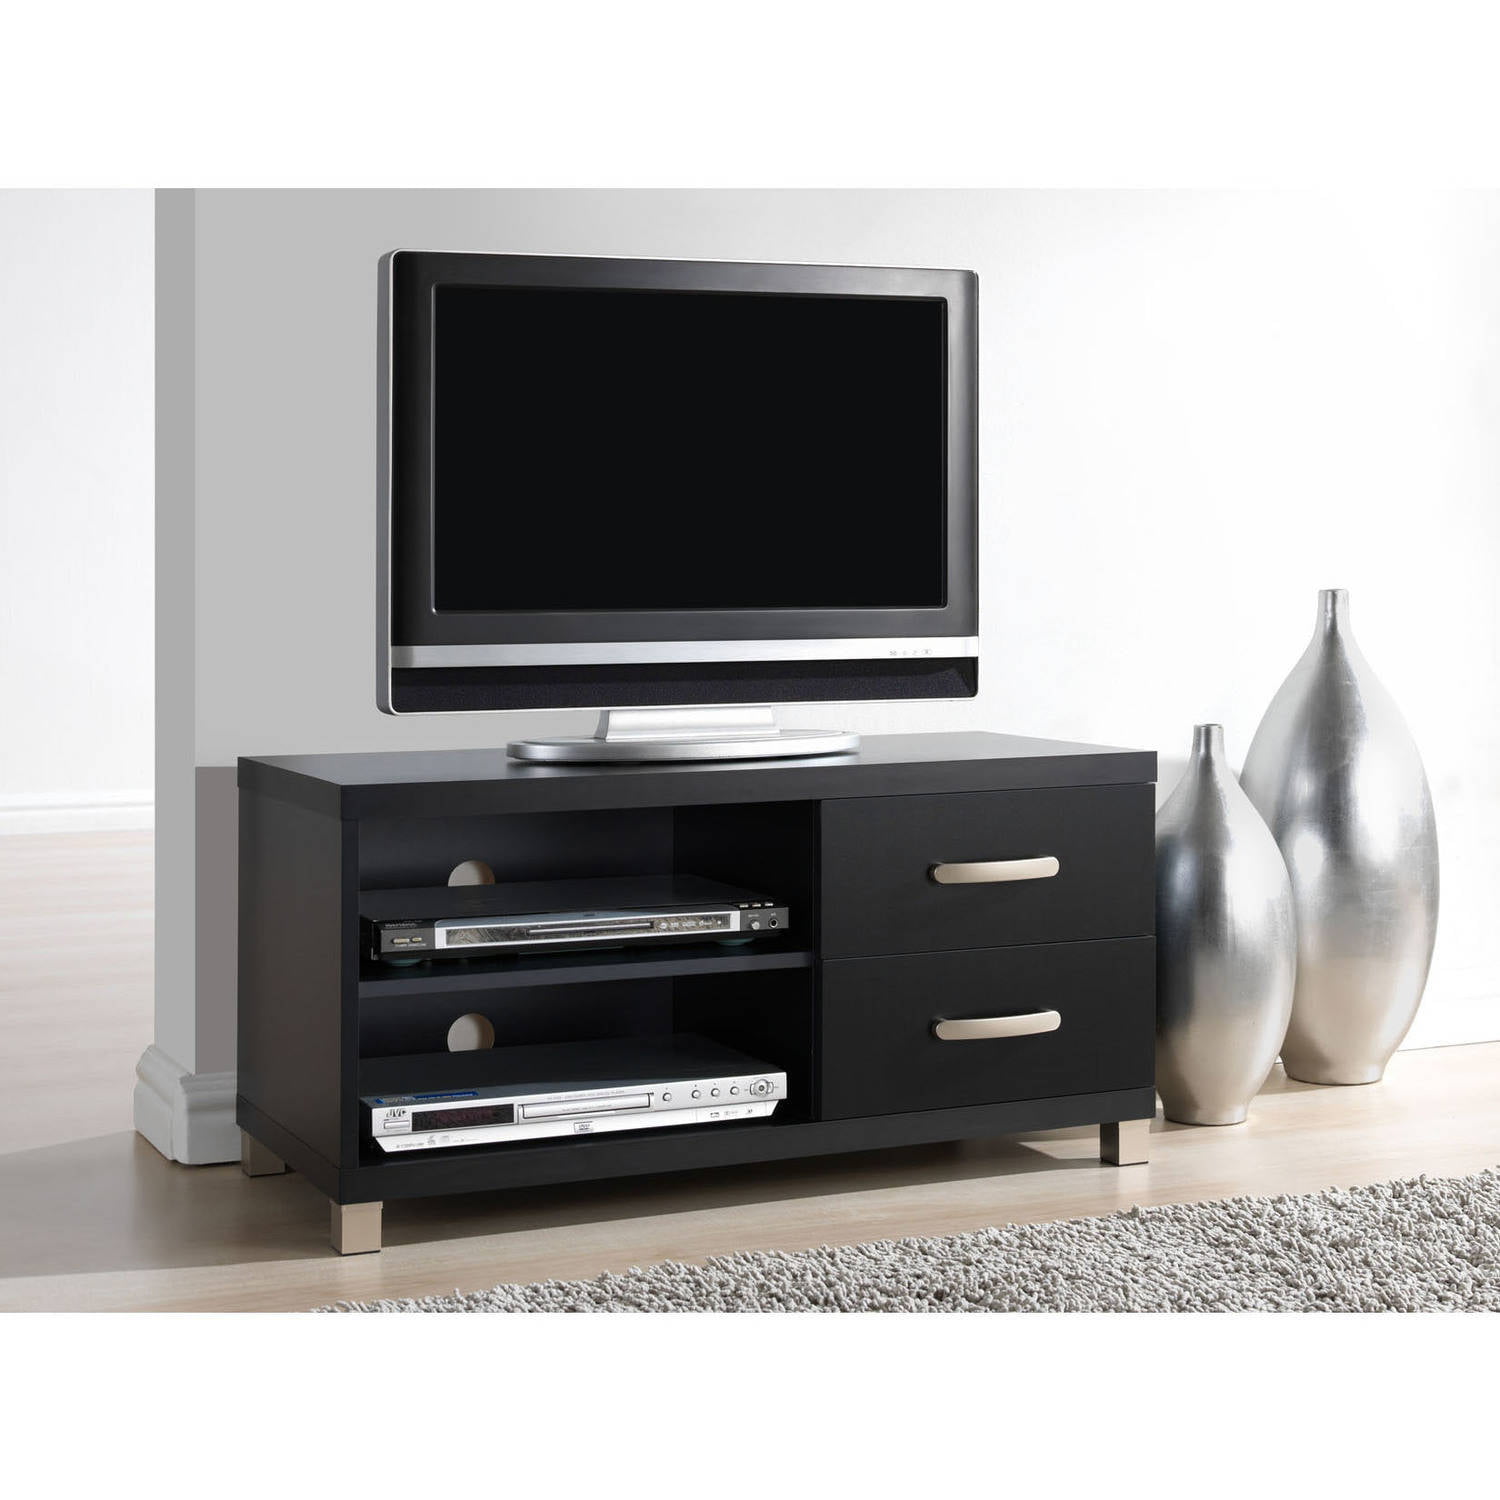 Techni Mobili 36 Modern Tv Stand With Storage For Tvs Up To 44